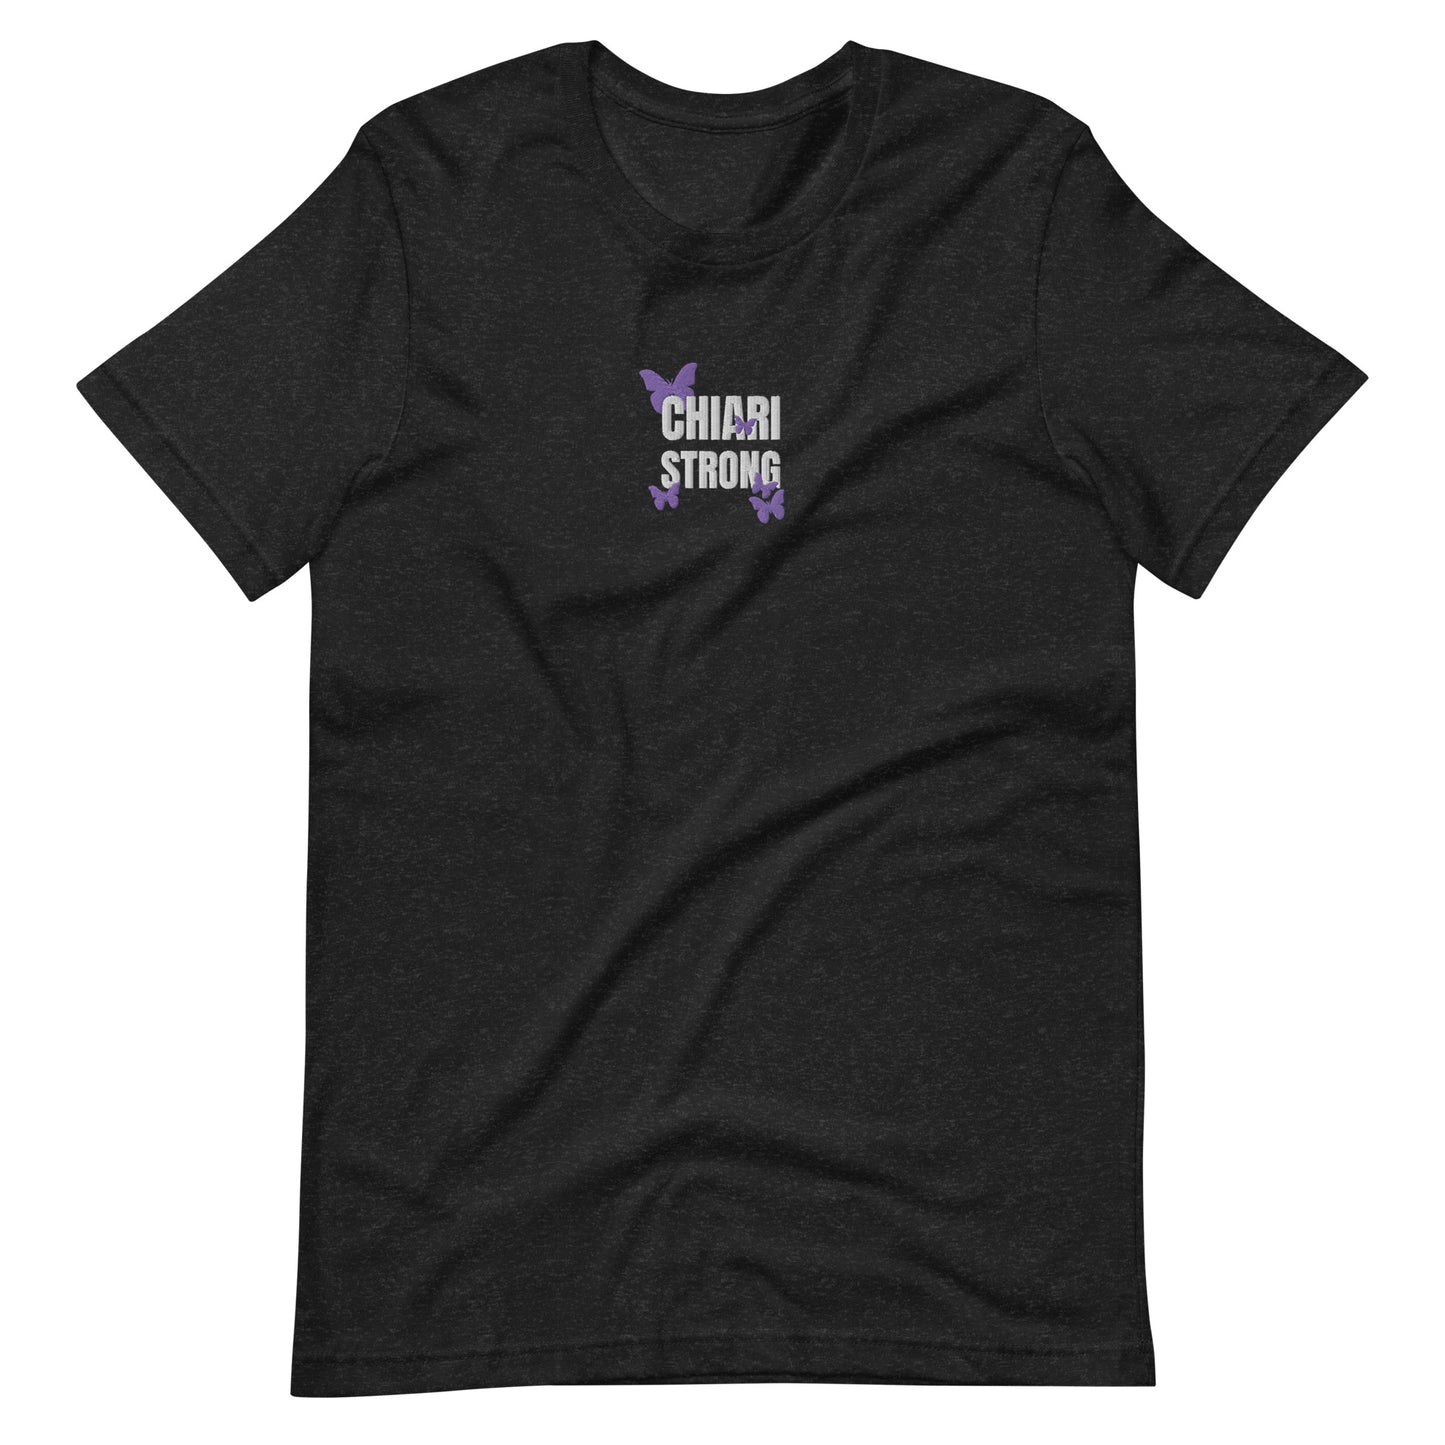 Chiari Strong Embroidered Unisex t-shirt